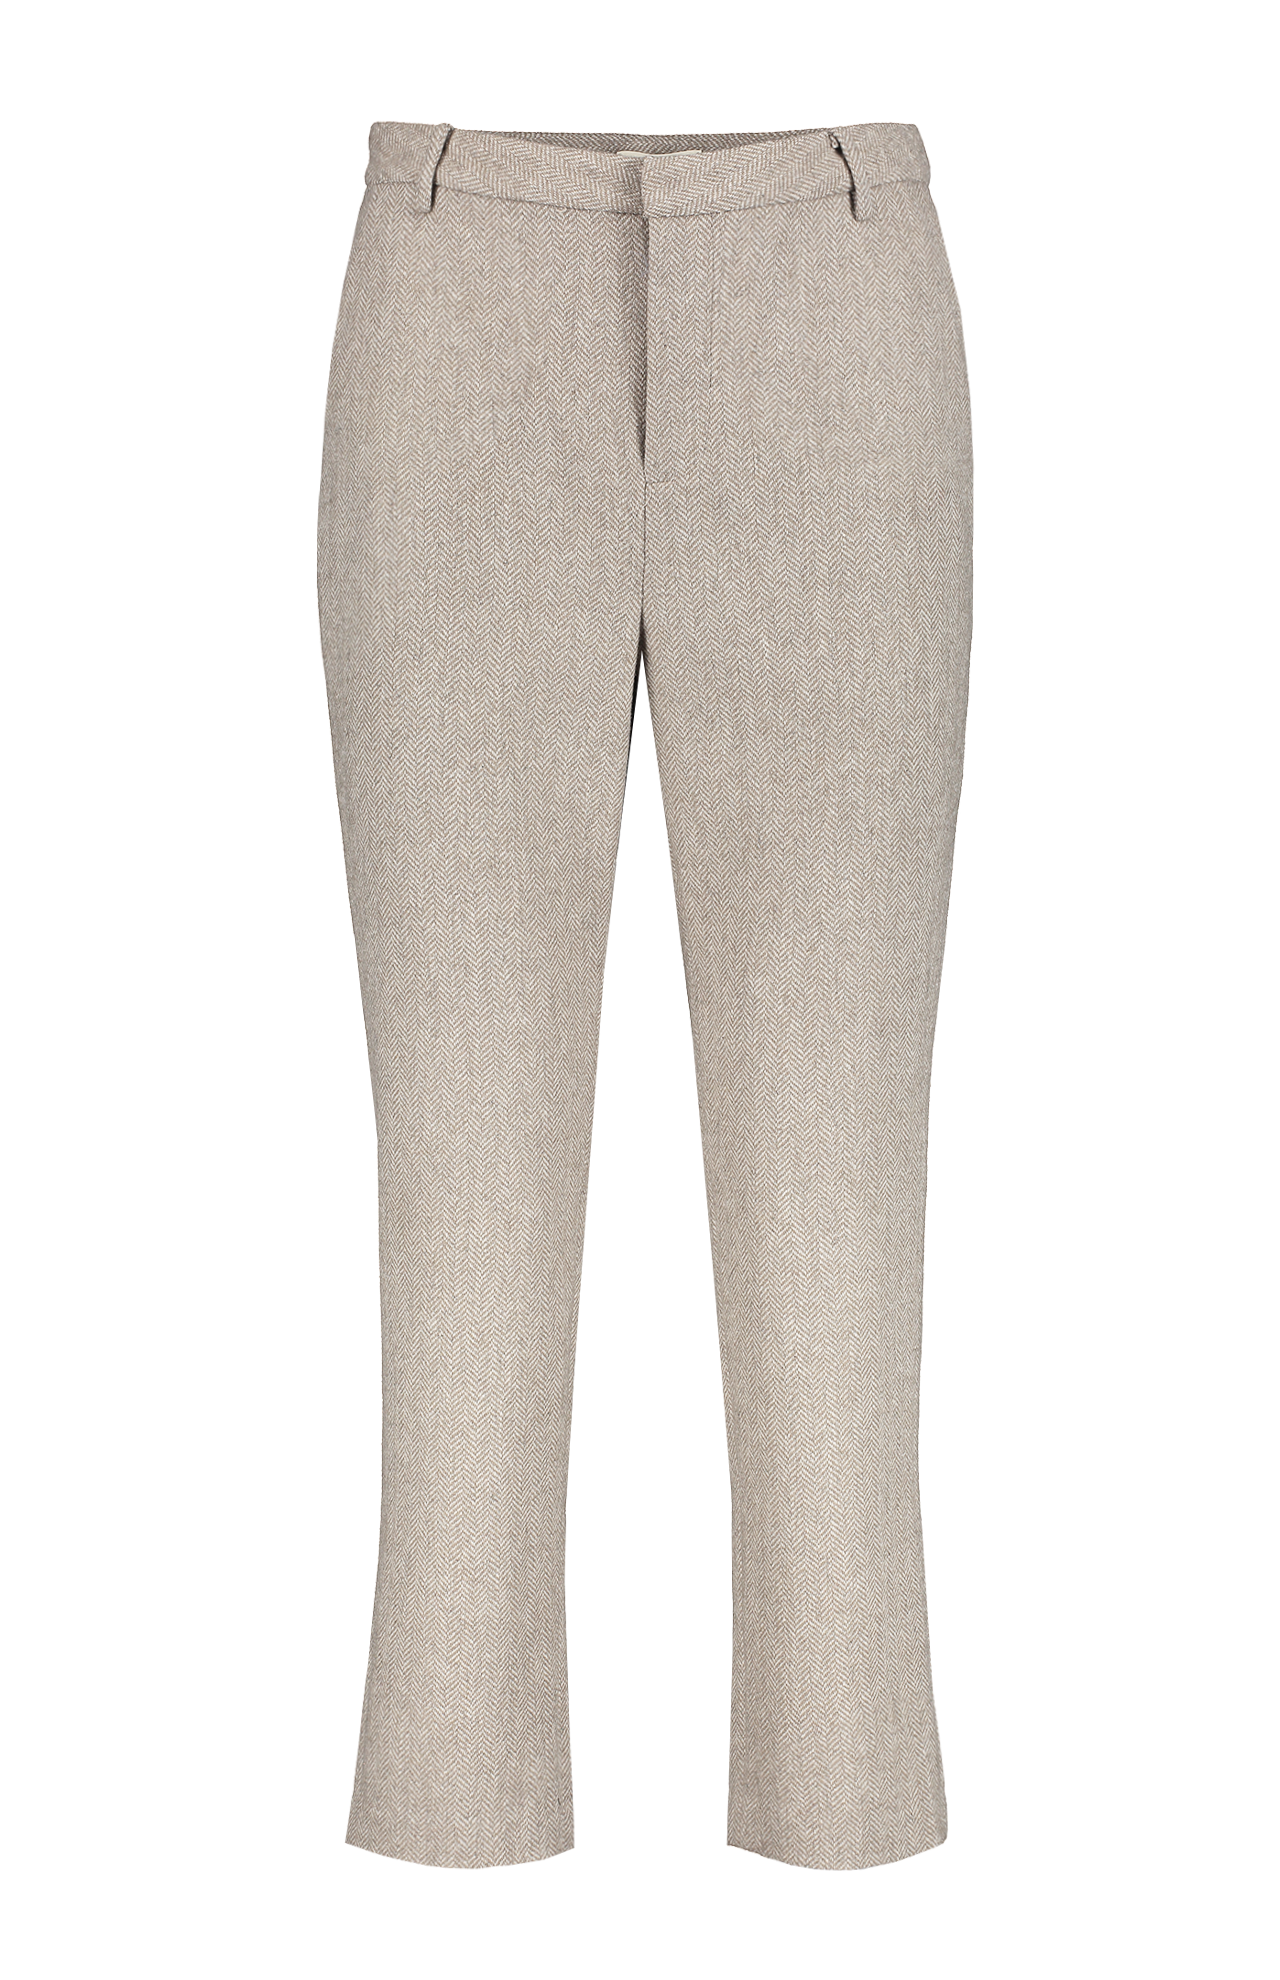 Lagence Ludivine Trouser Taupe Grey Front Mannequin Image (7025423646835)